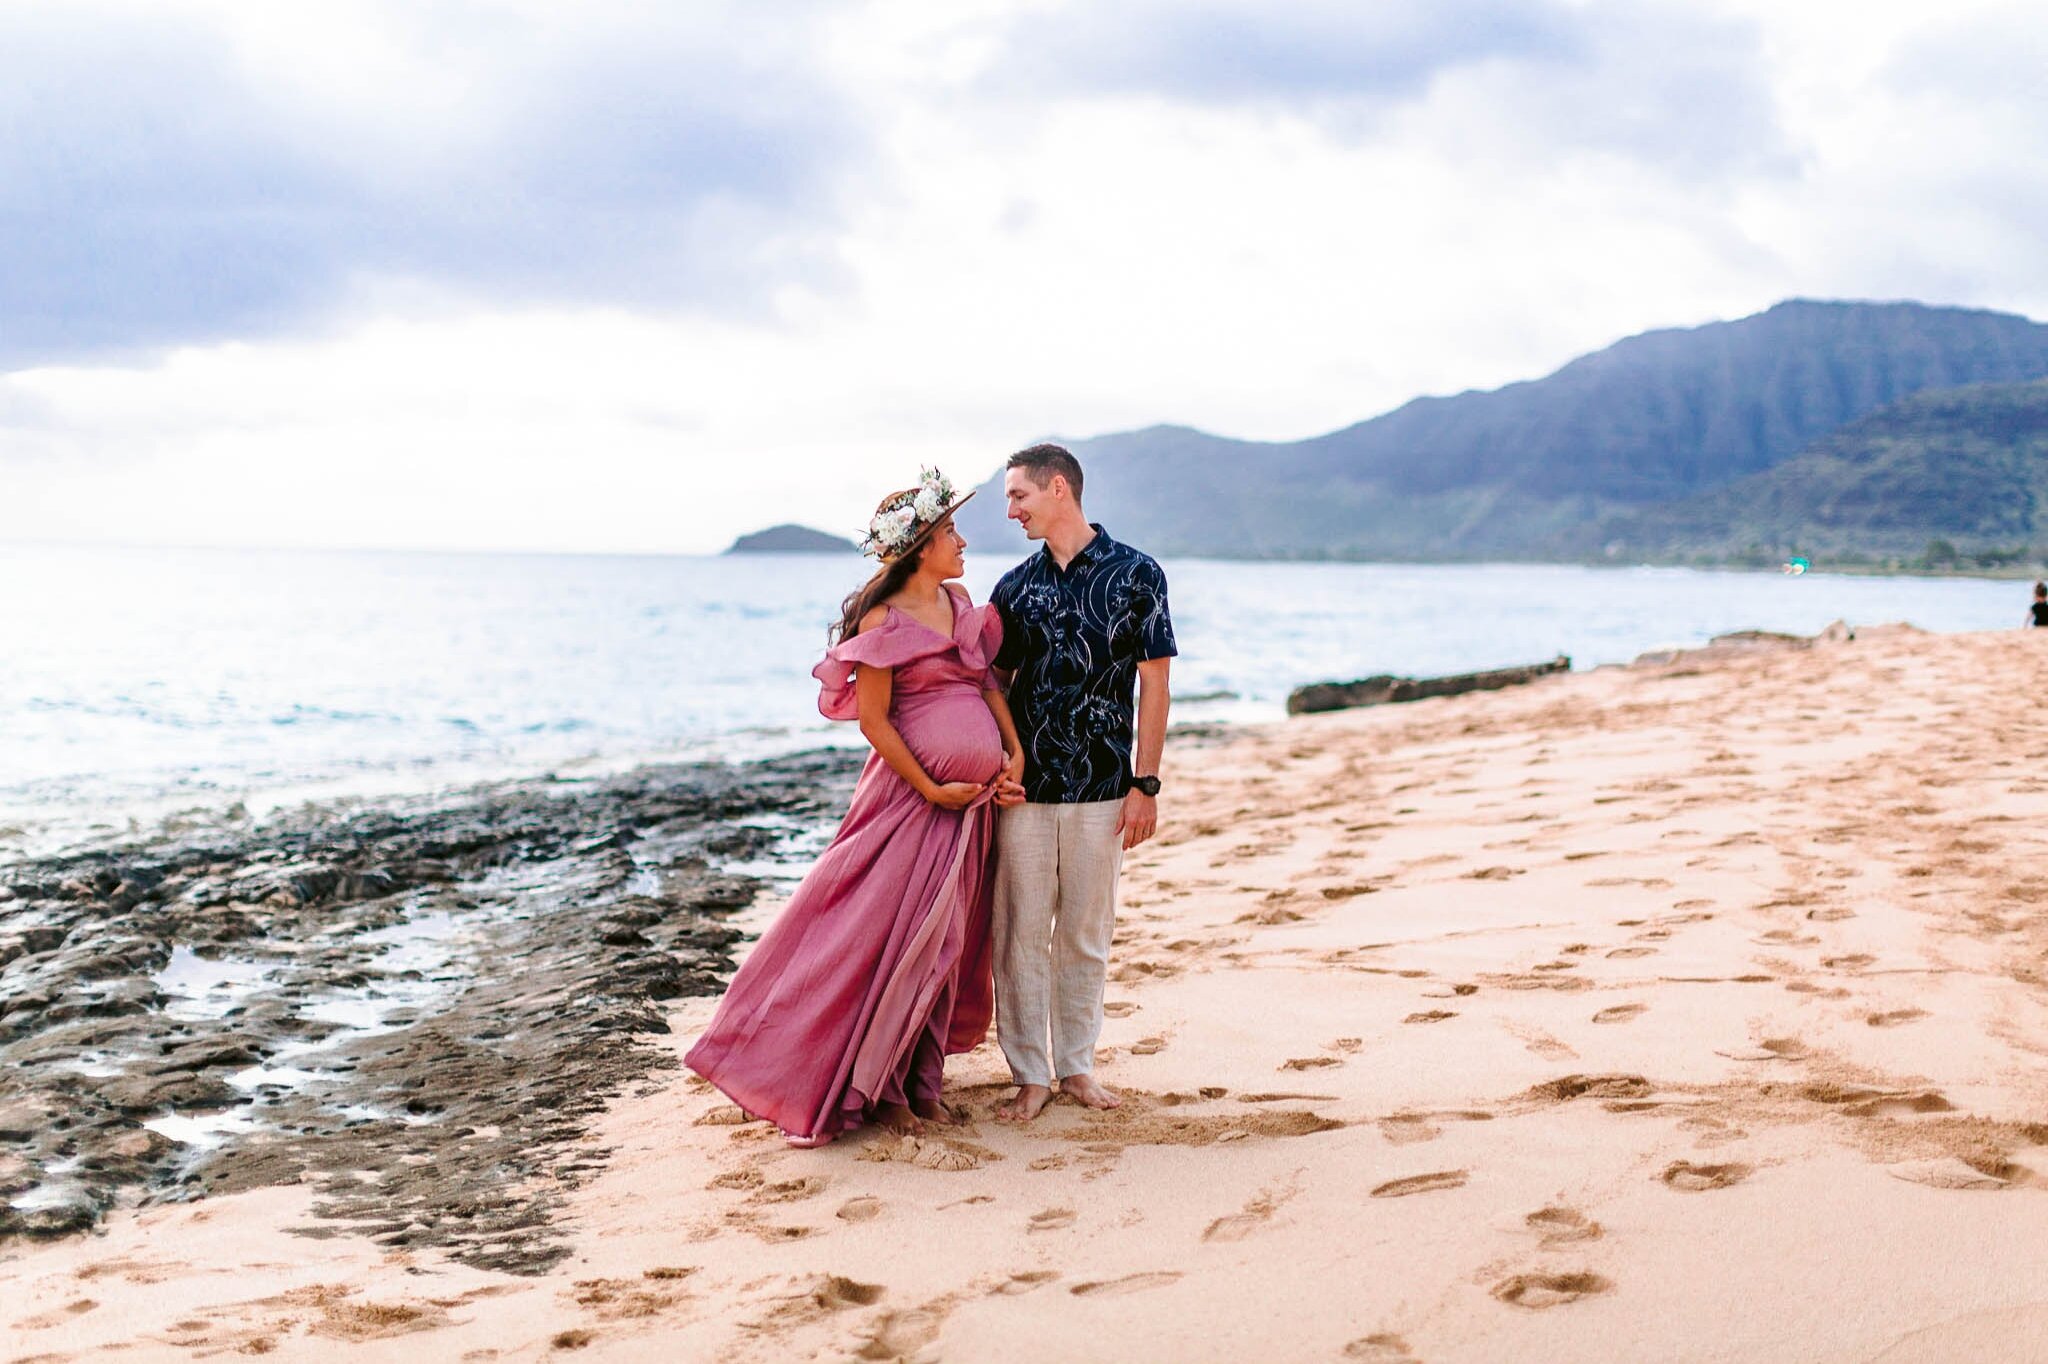 Ruth - Maternity Photography Session at Maili Beach Park, West side oahu - hawaii family photographer 22.jpg